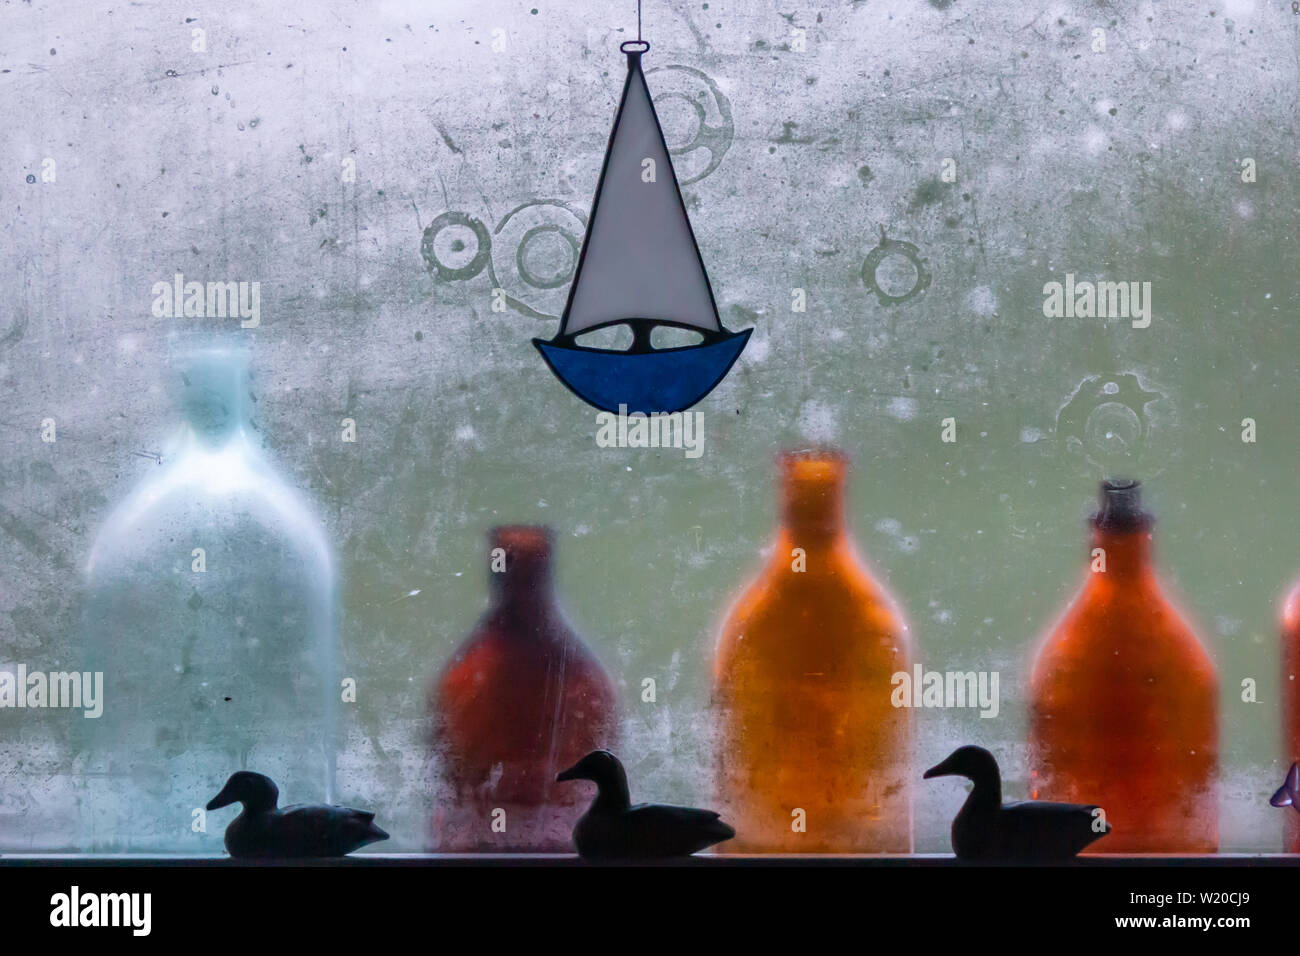 Colorful bottles lined up in front of a steamy glass window following a hot sauna in a cabin on the Finnish Archipelago. Stock Photo